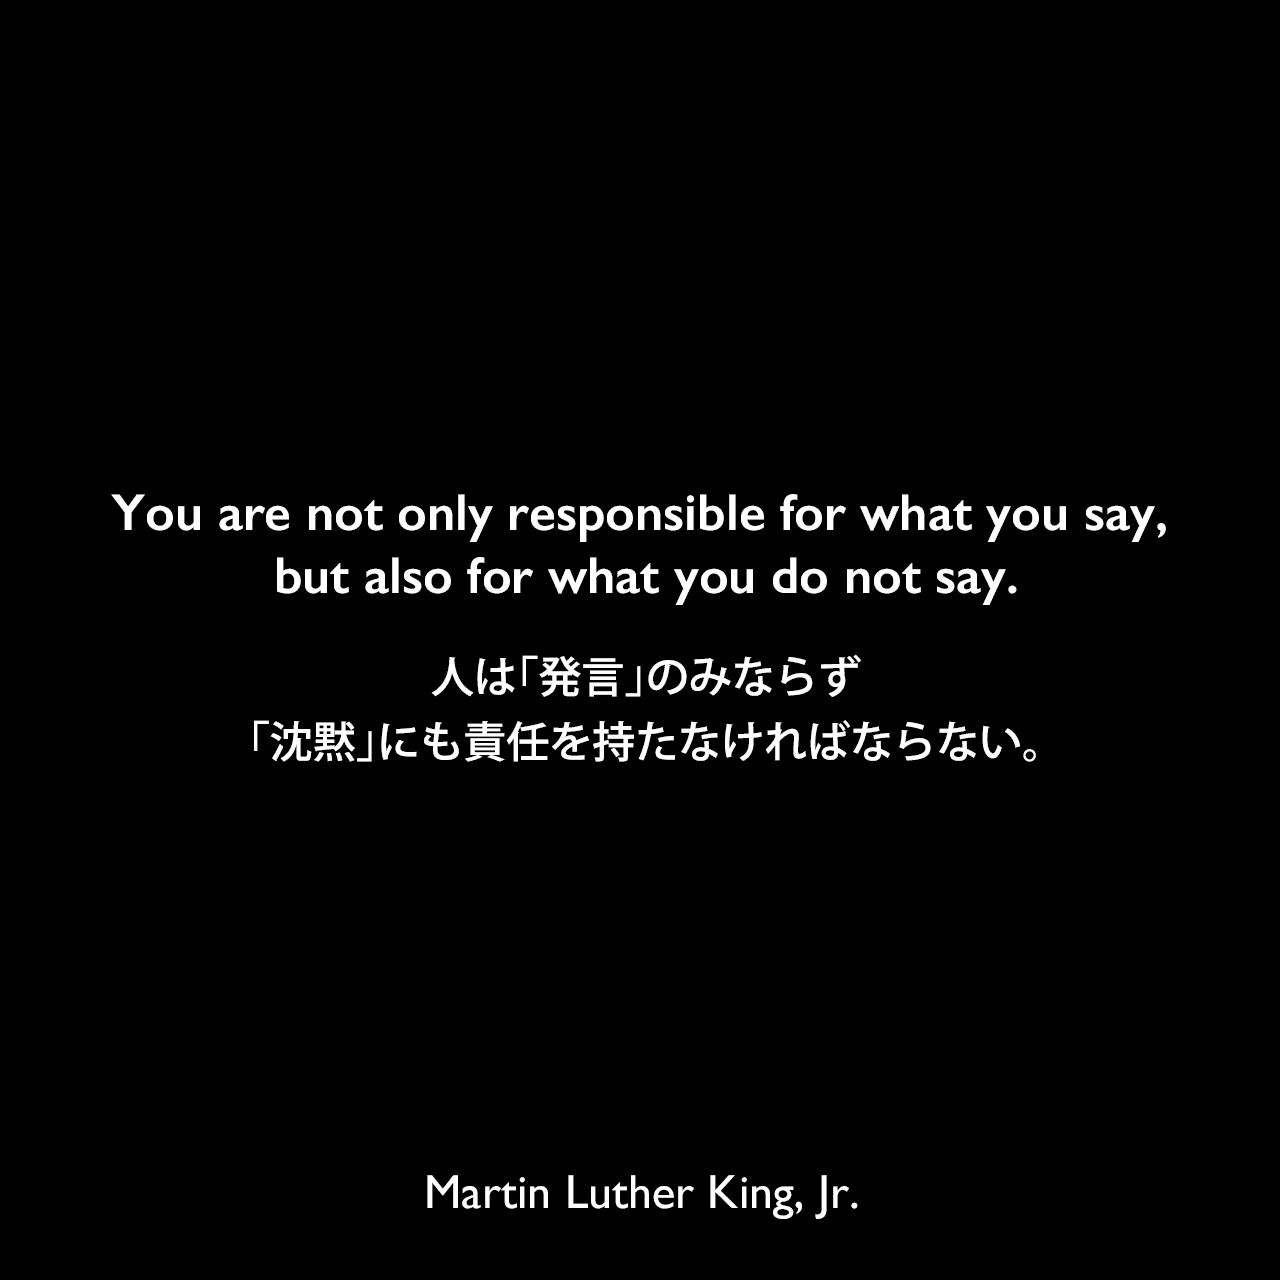 You are not only responsible for what you say, but also for what you do not say.人は「発言」のみならず「沈黙」にも責任を持たなければならない。Martin Luther King, Jr.